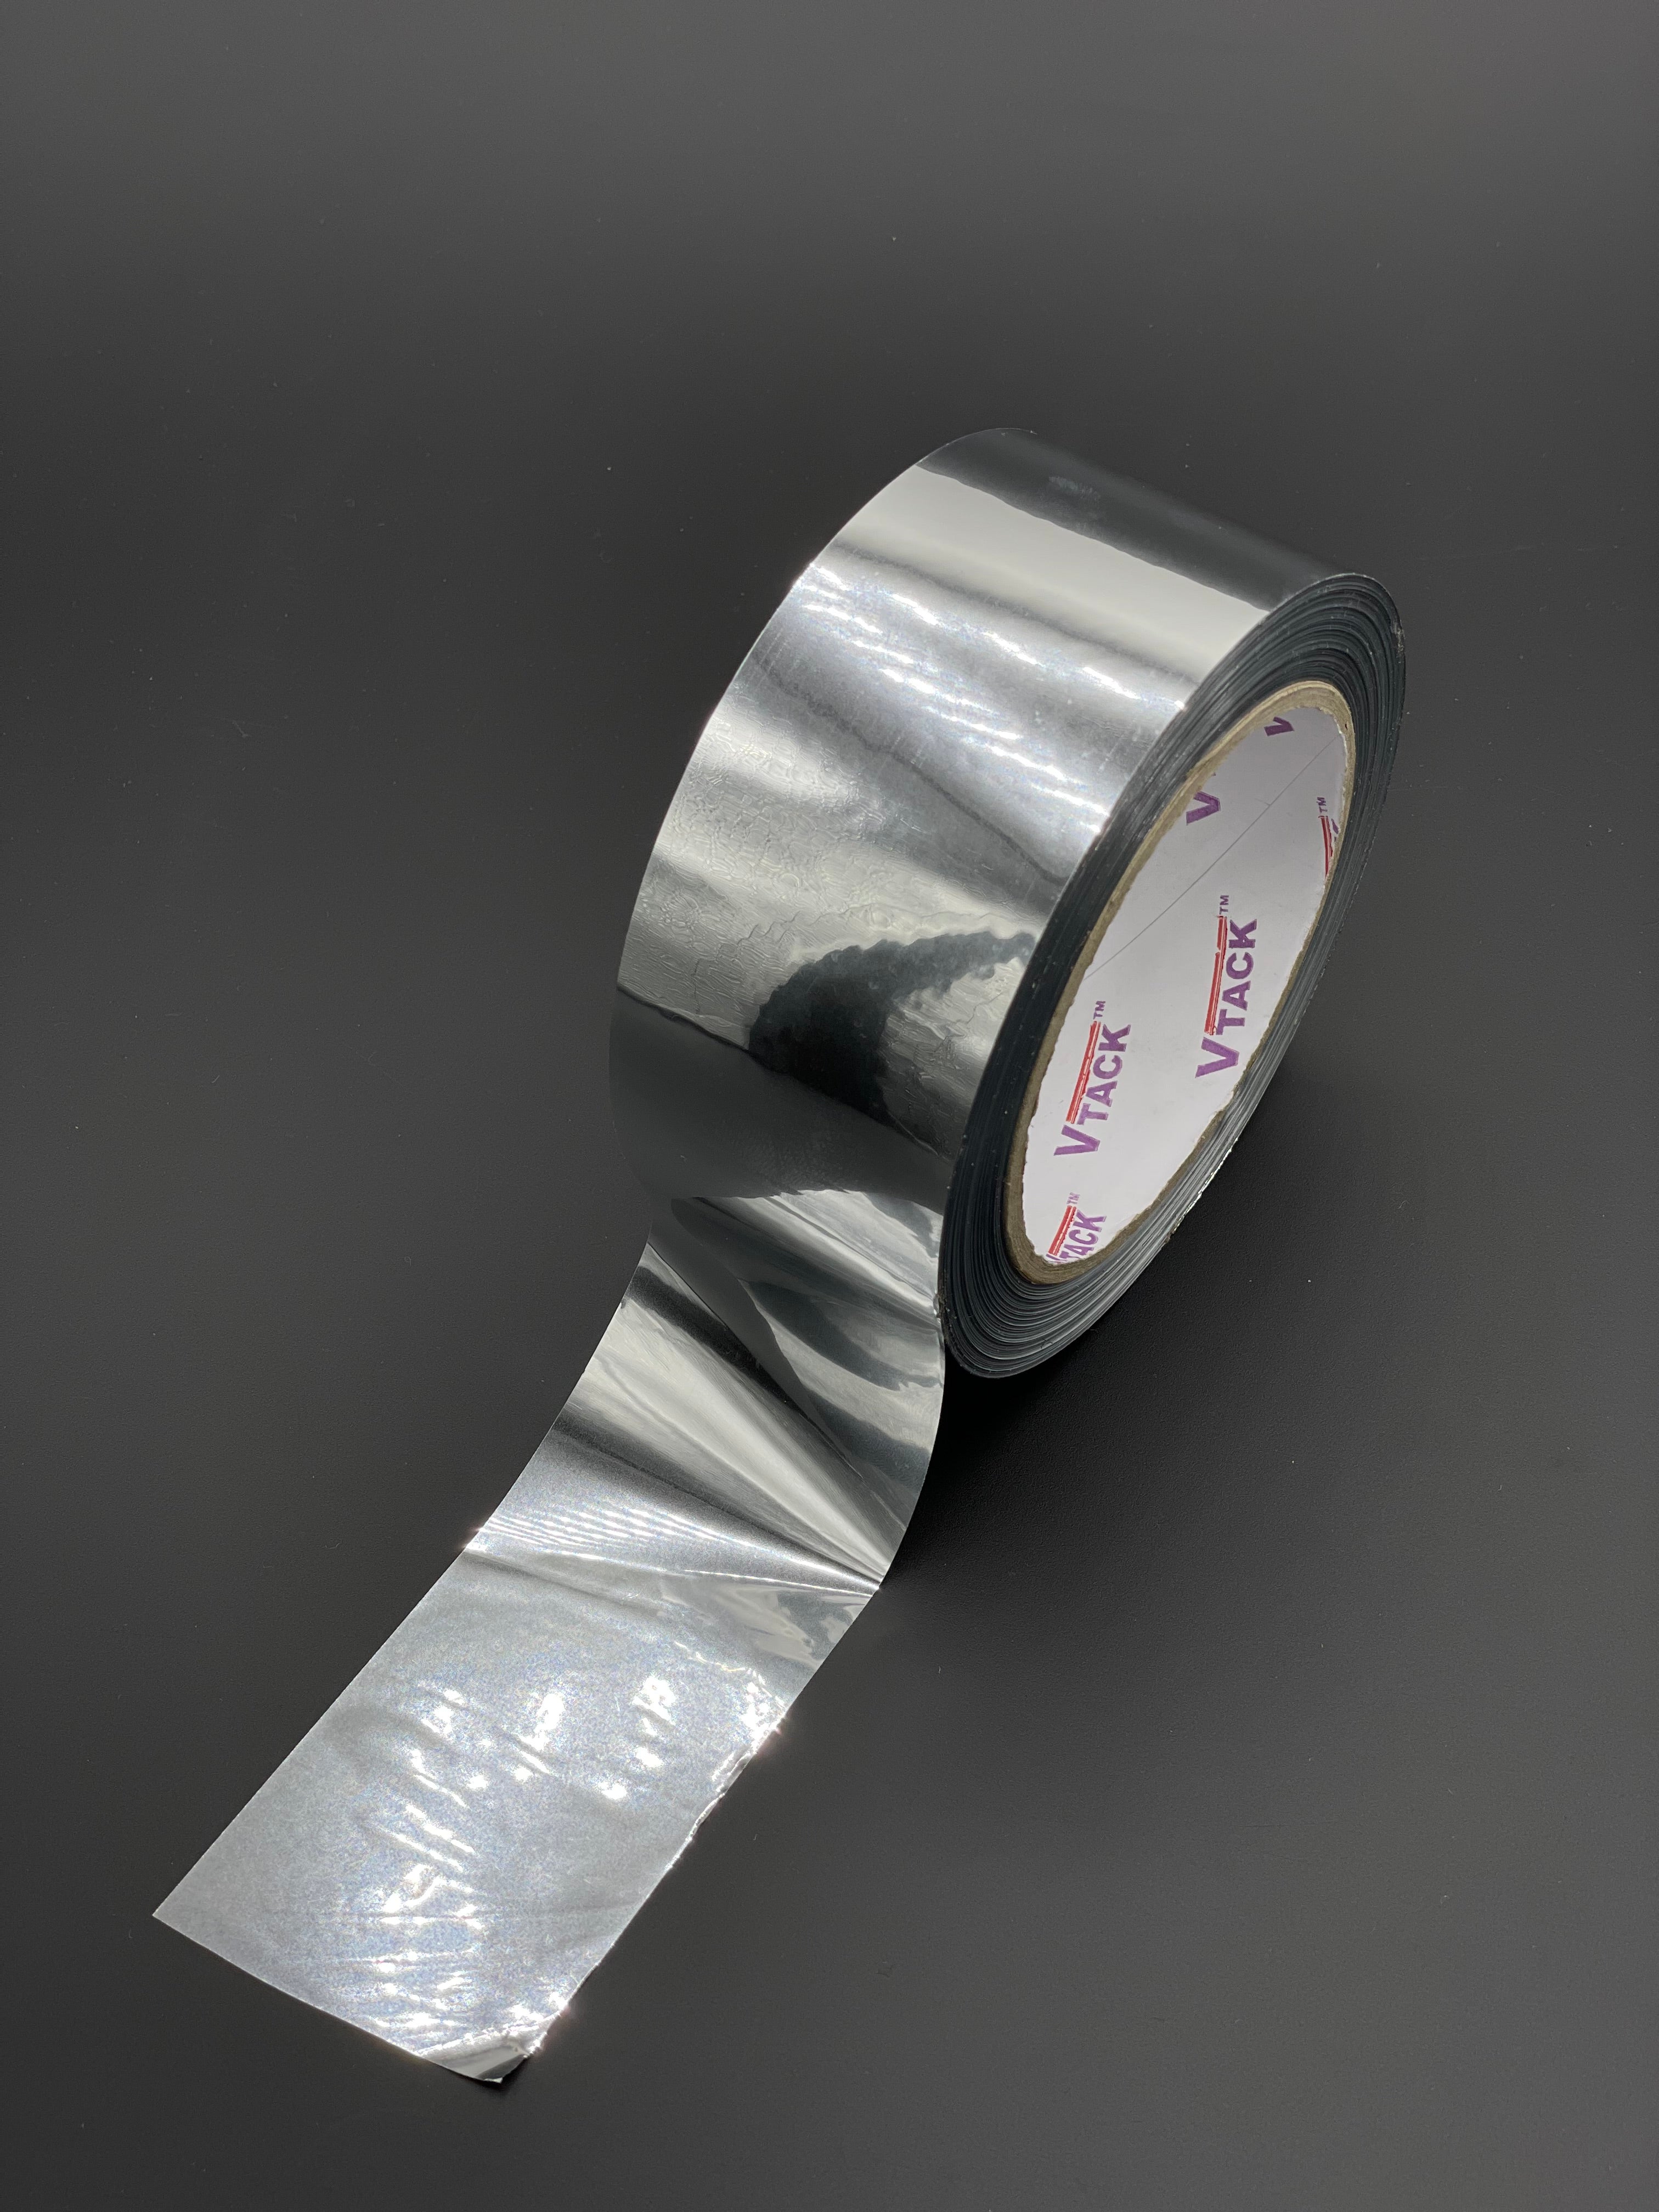 VTACK Insulation Seaming Tape 48mm x 50m